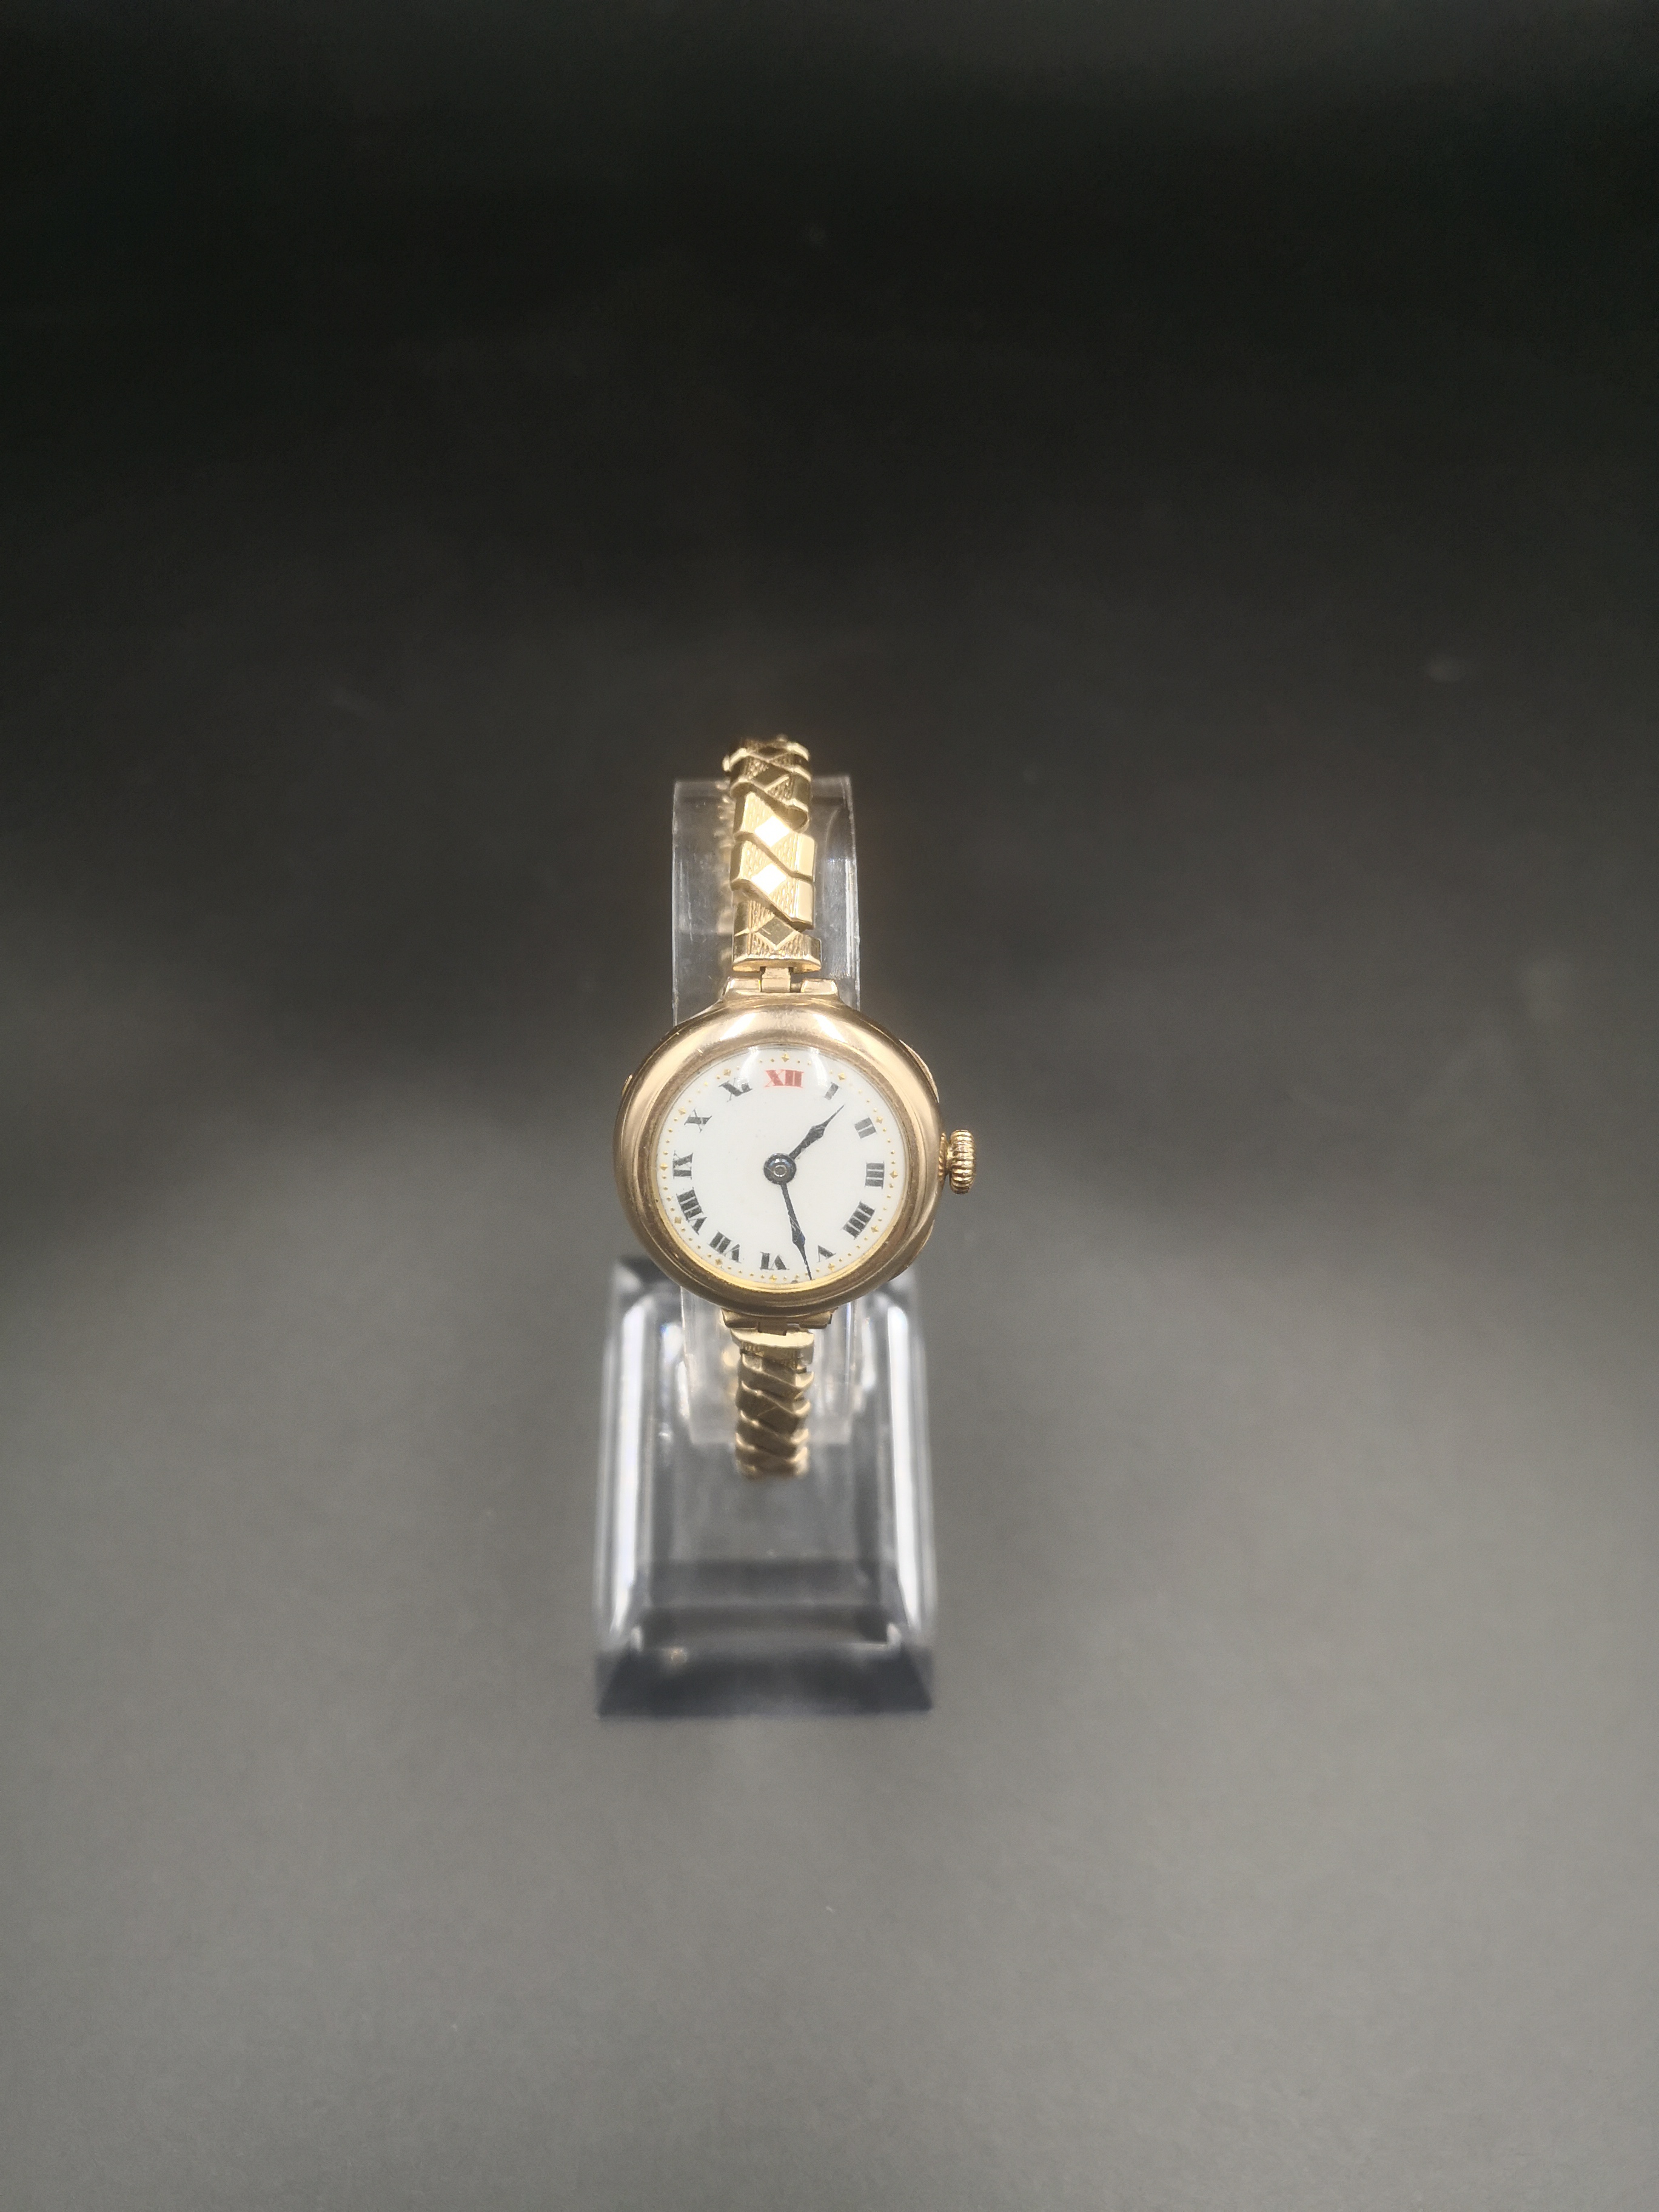 Ladies wrist watch with enamel face - Image 5 of 5